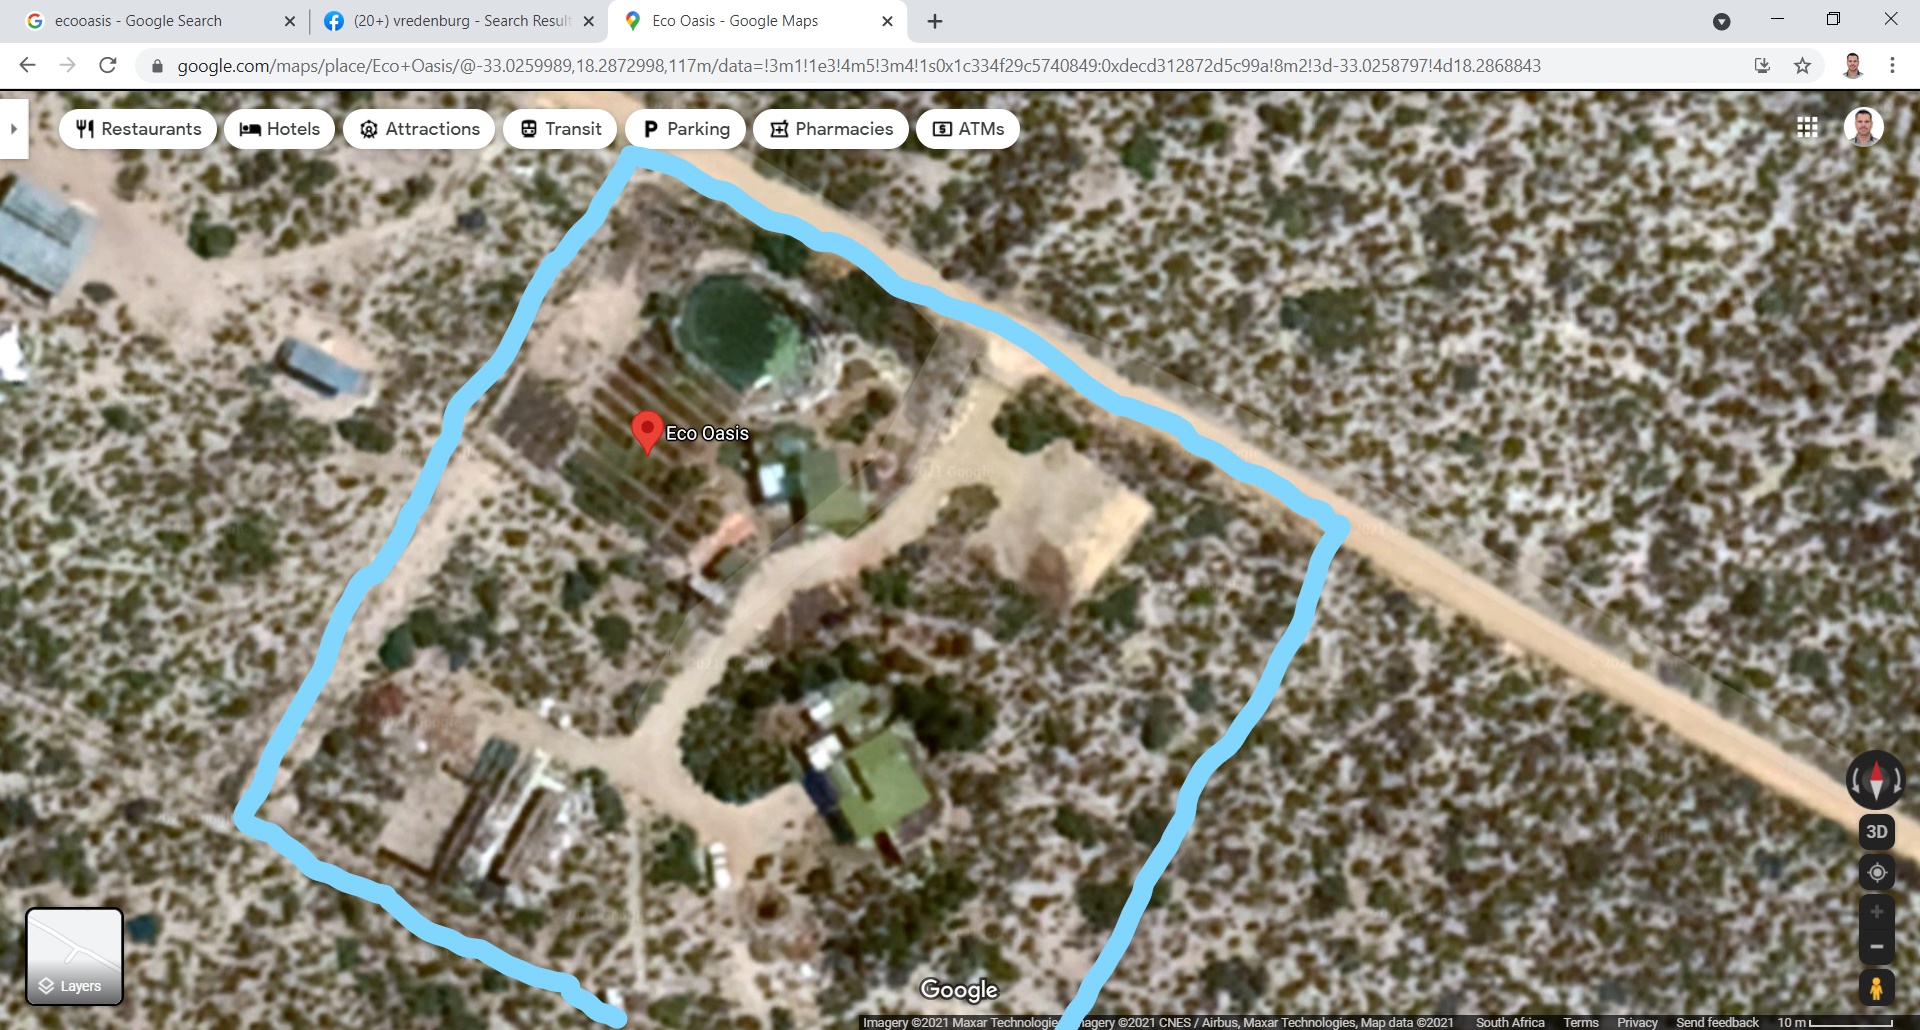 Our Eco Oasis and Nursey as per Google maps